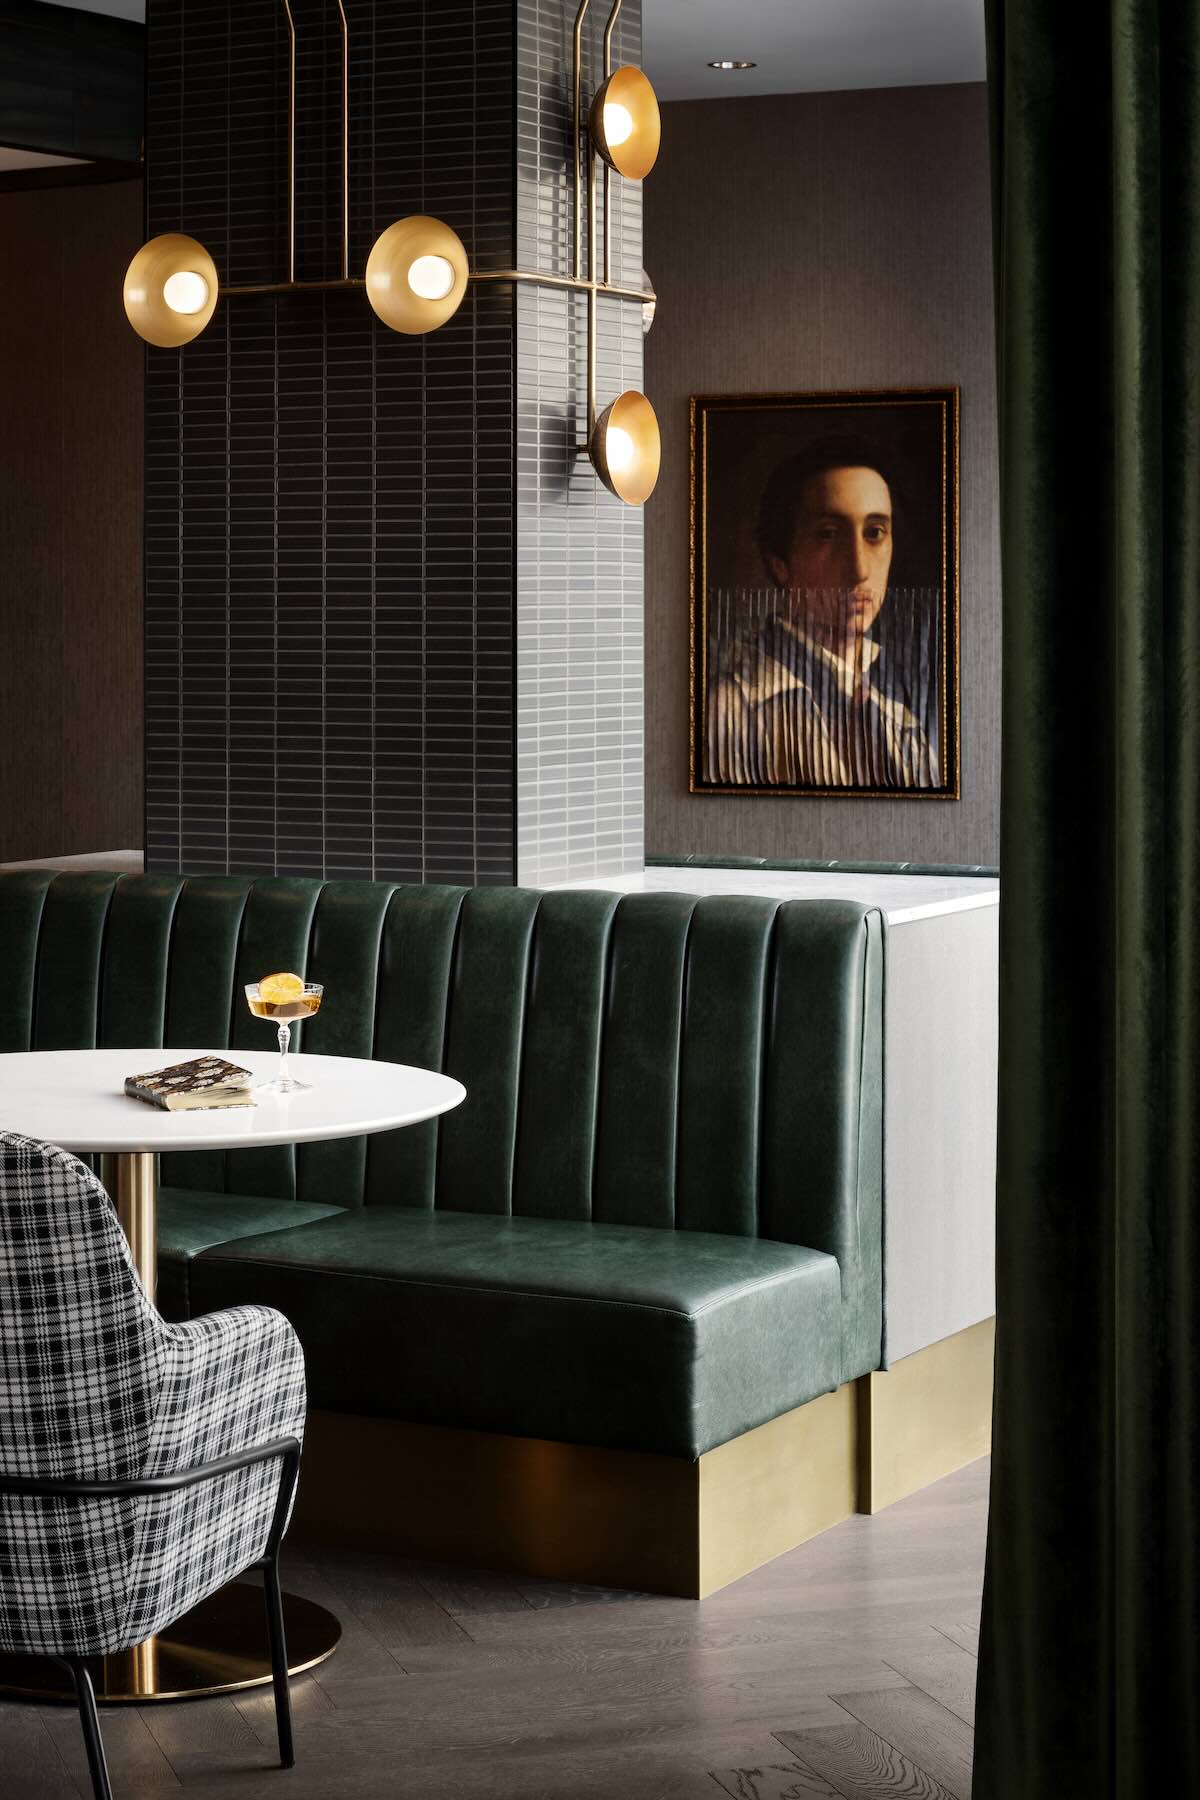 A-close-up-of-restaurant-with-dark-green-sofa-and-image-of-man-on-wall-as-art